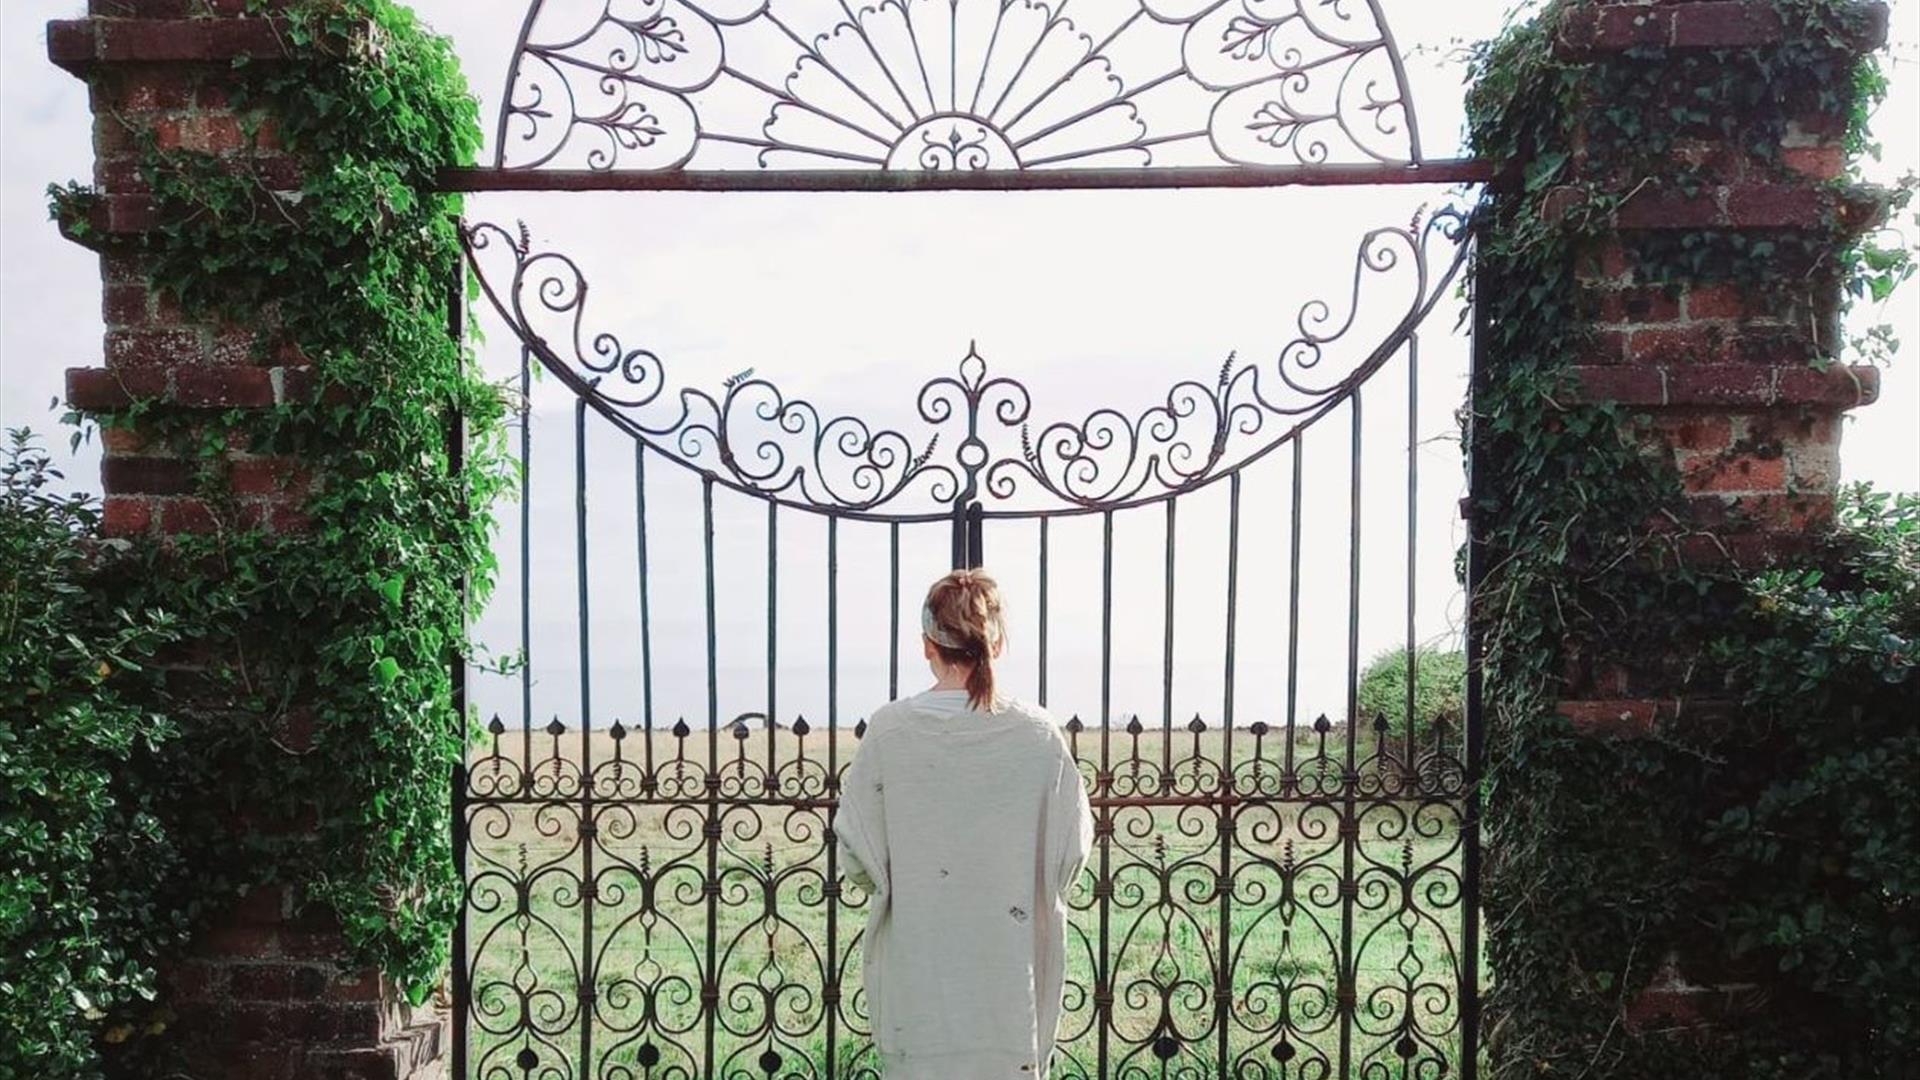 Person facing wrought iron gate with fields in background